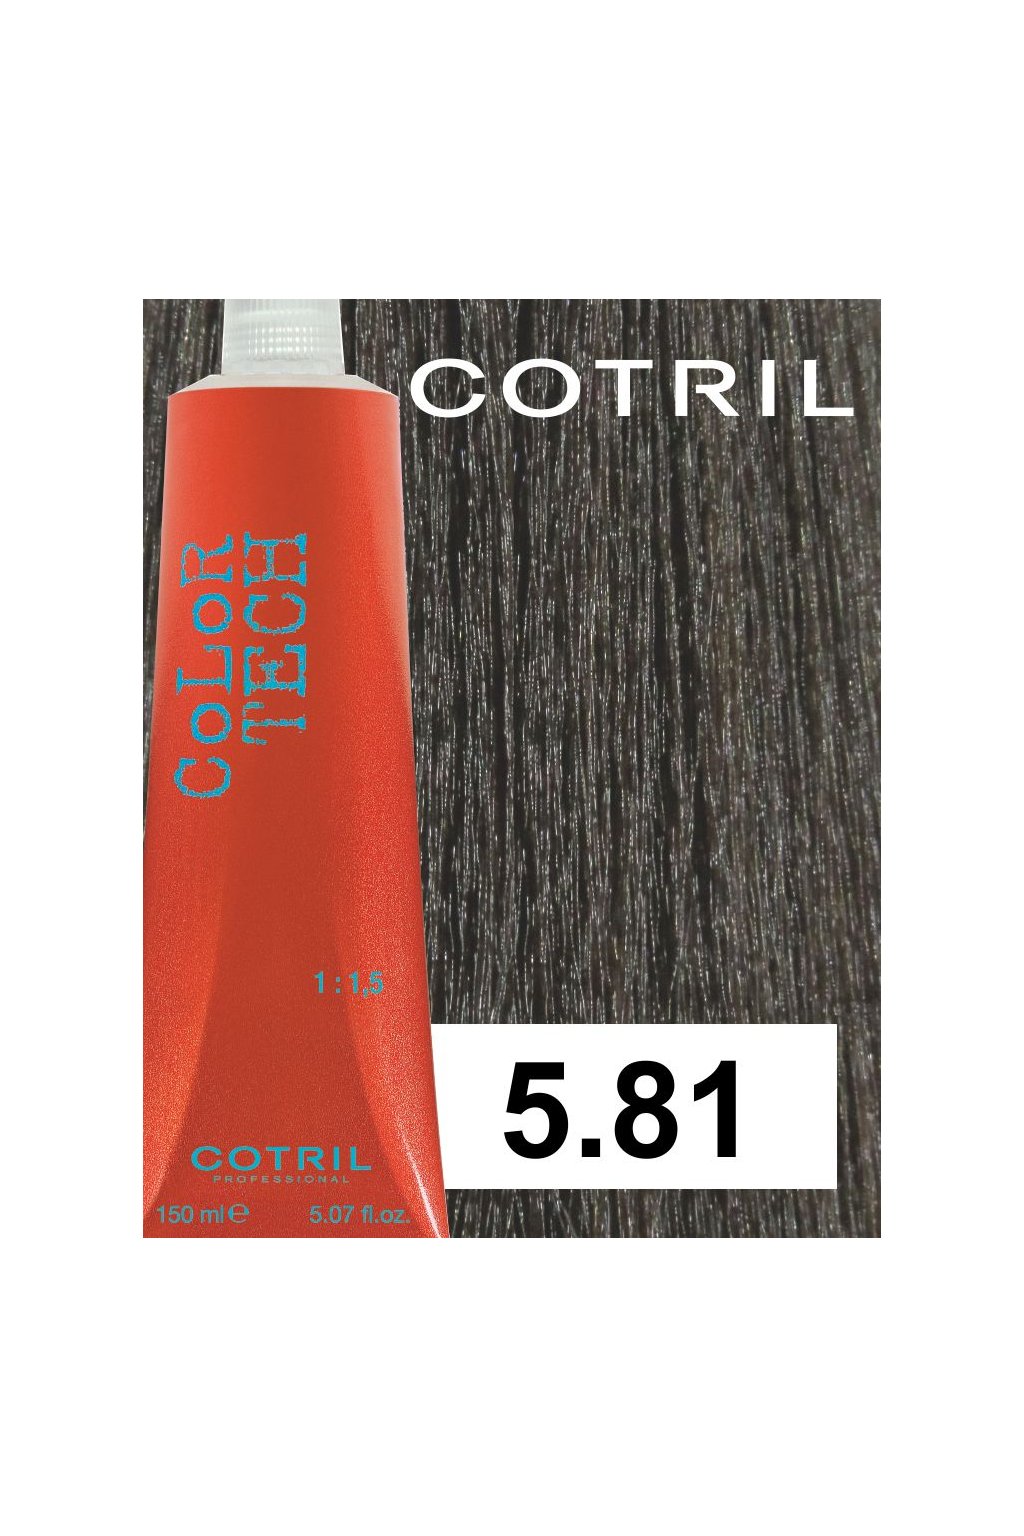 5 81 ct cotril